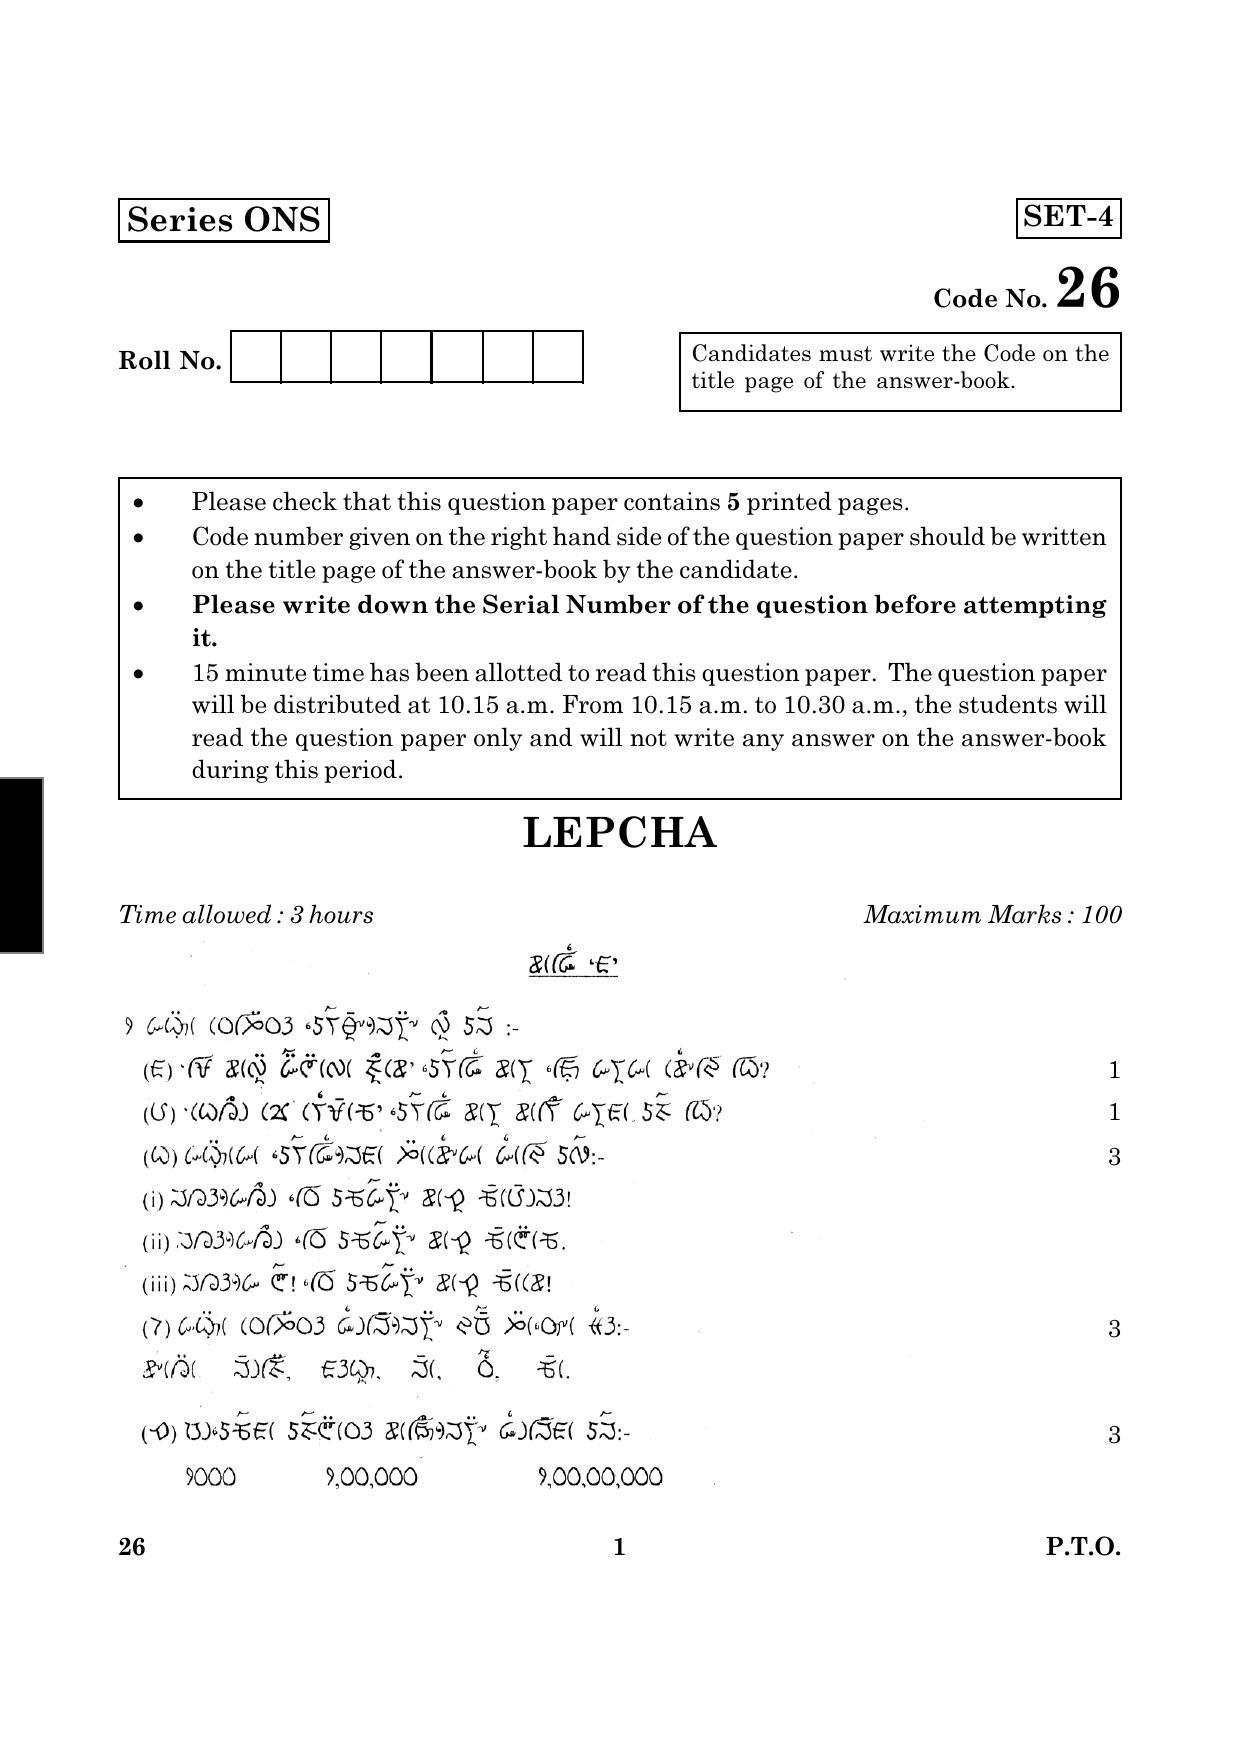 CBSE Class 12 026 Lepcha 2016 Question Paper - Page 1